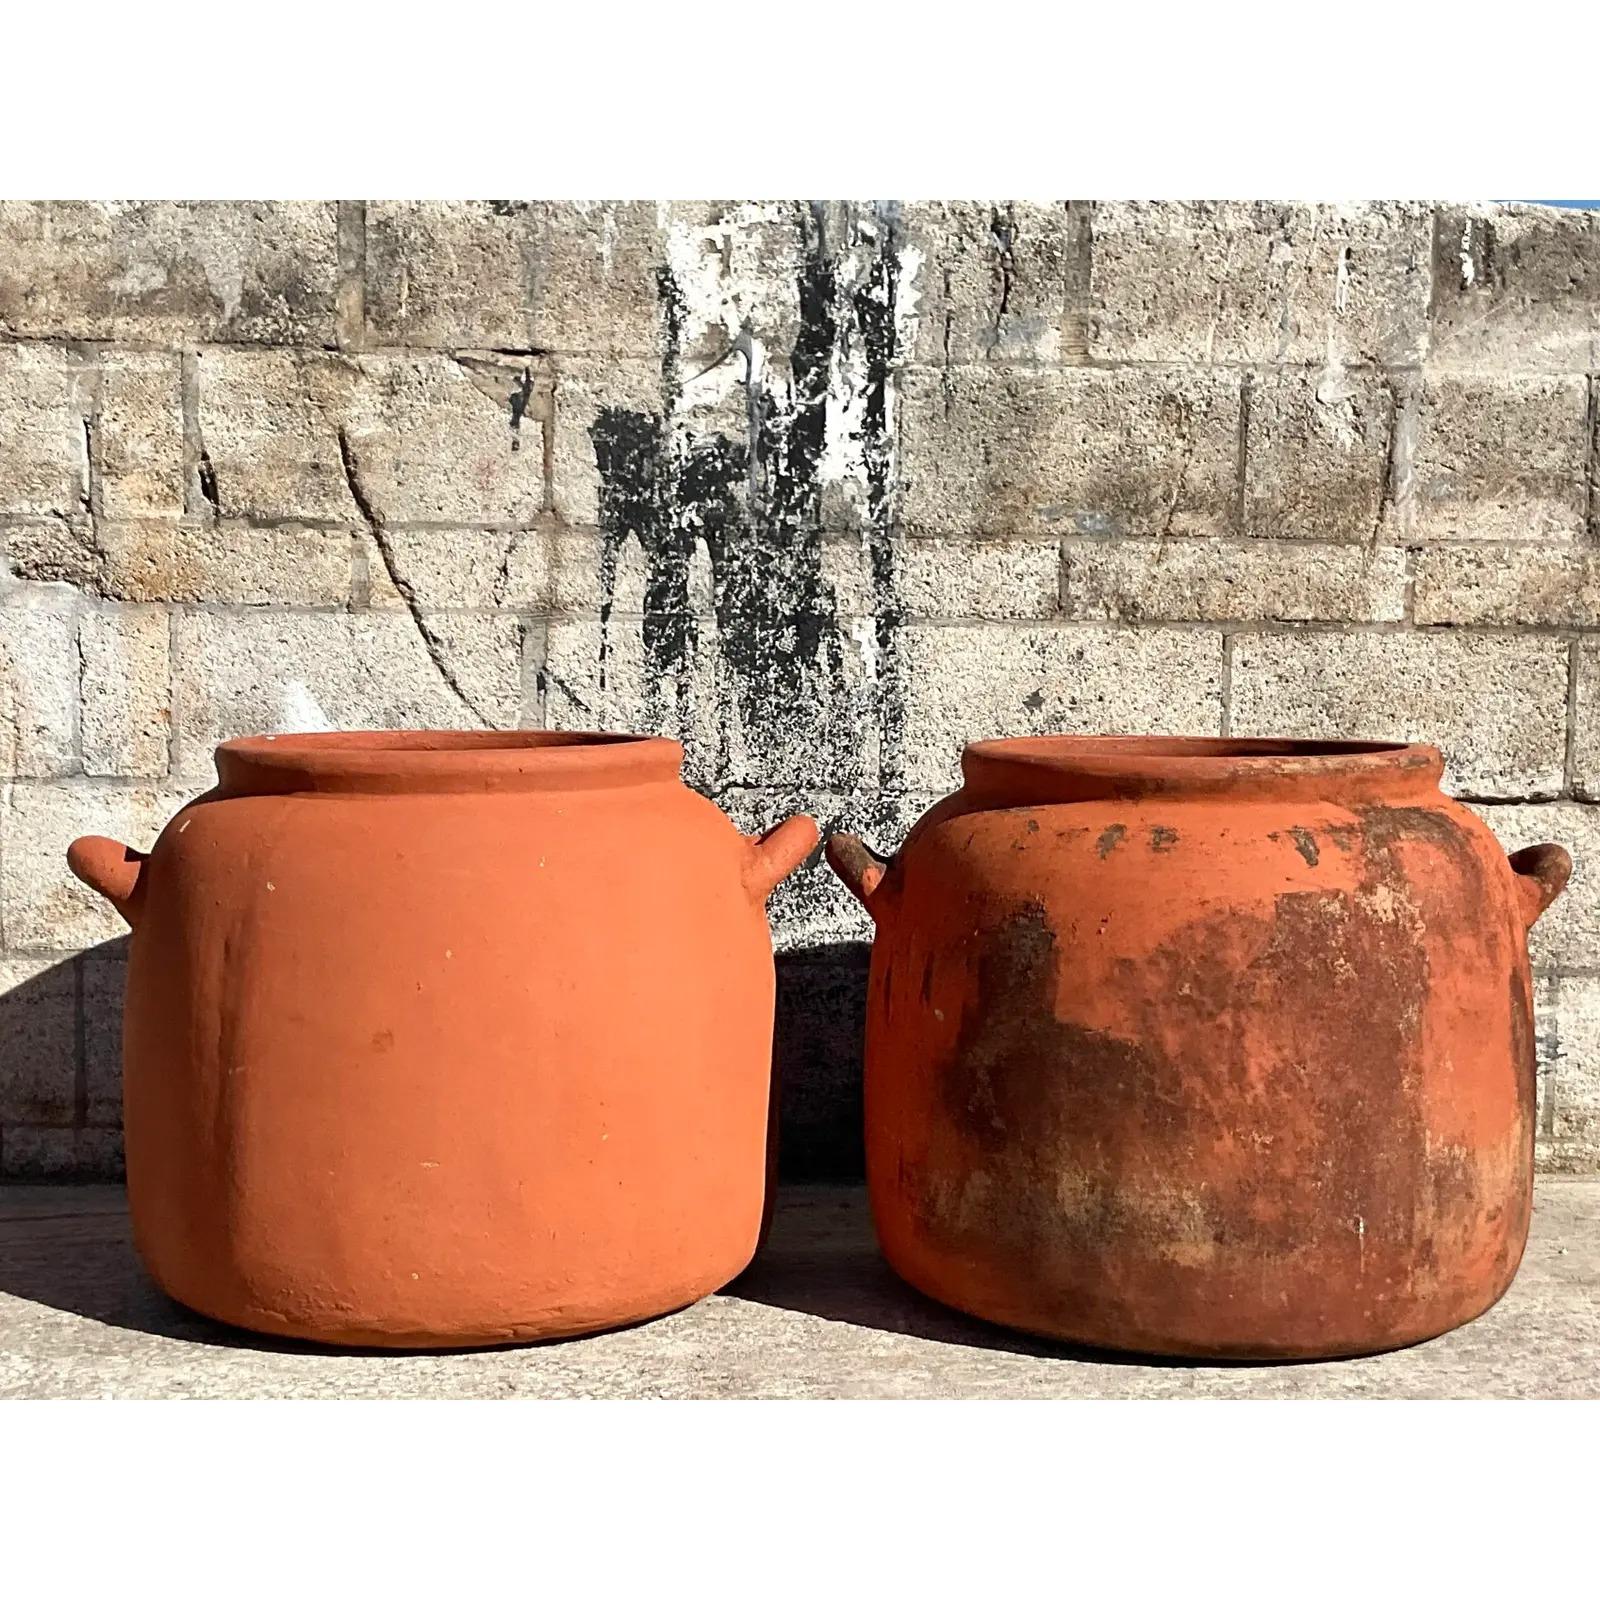 Vintage Boho Monumental Terra Cotta Planters - a Pair In Good Condition For Sale In west palm beach, FL